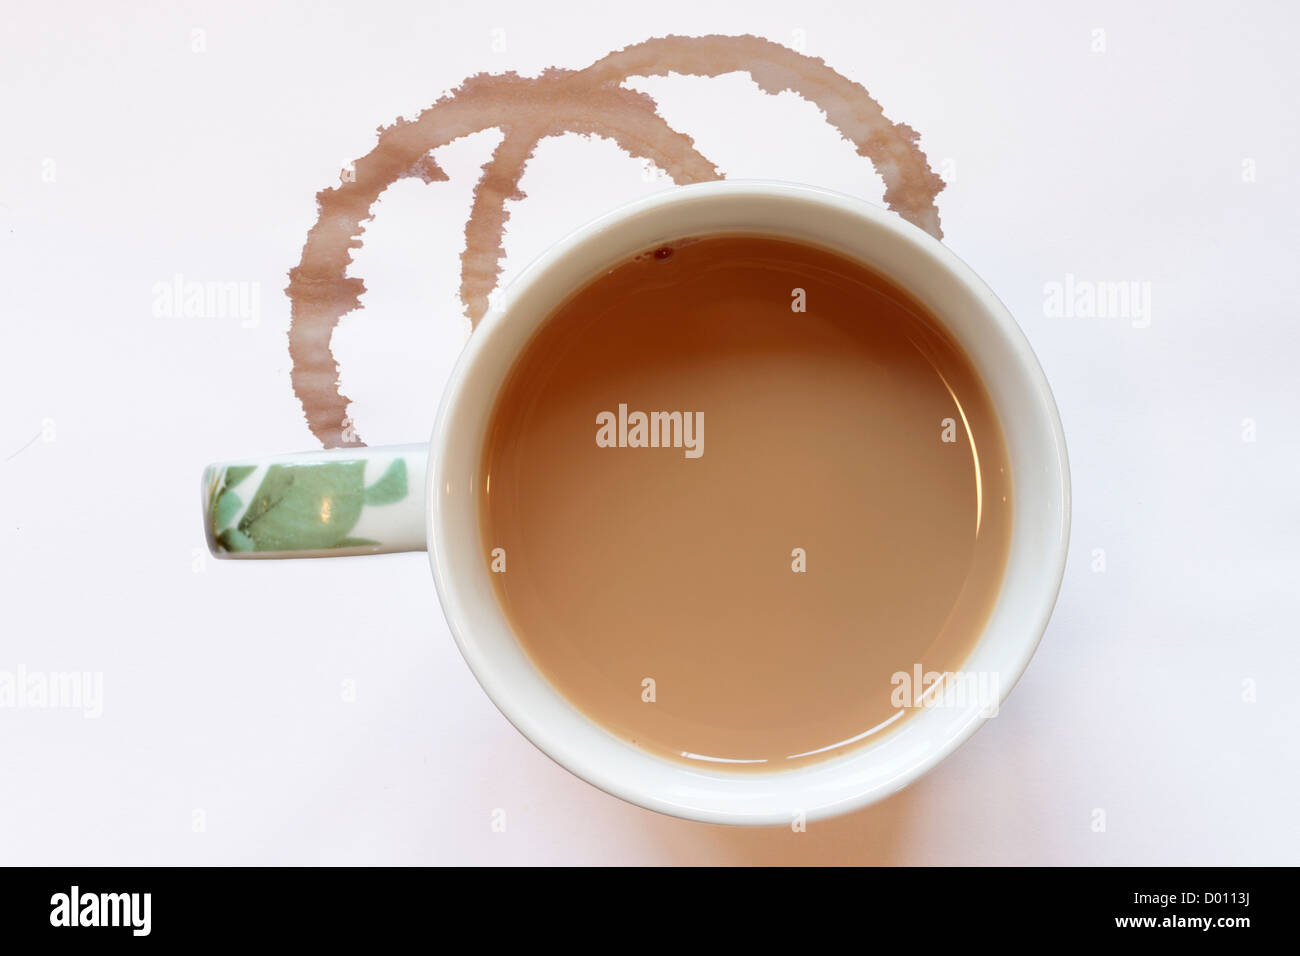 Mug of Tea with Tea Rings viewed from above Stock Photo